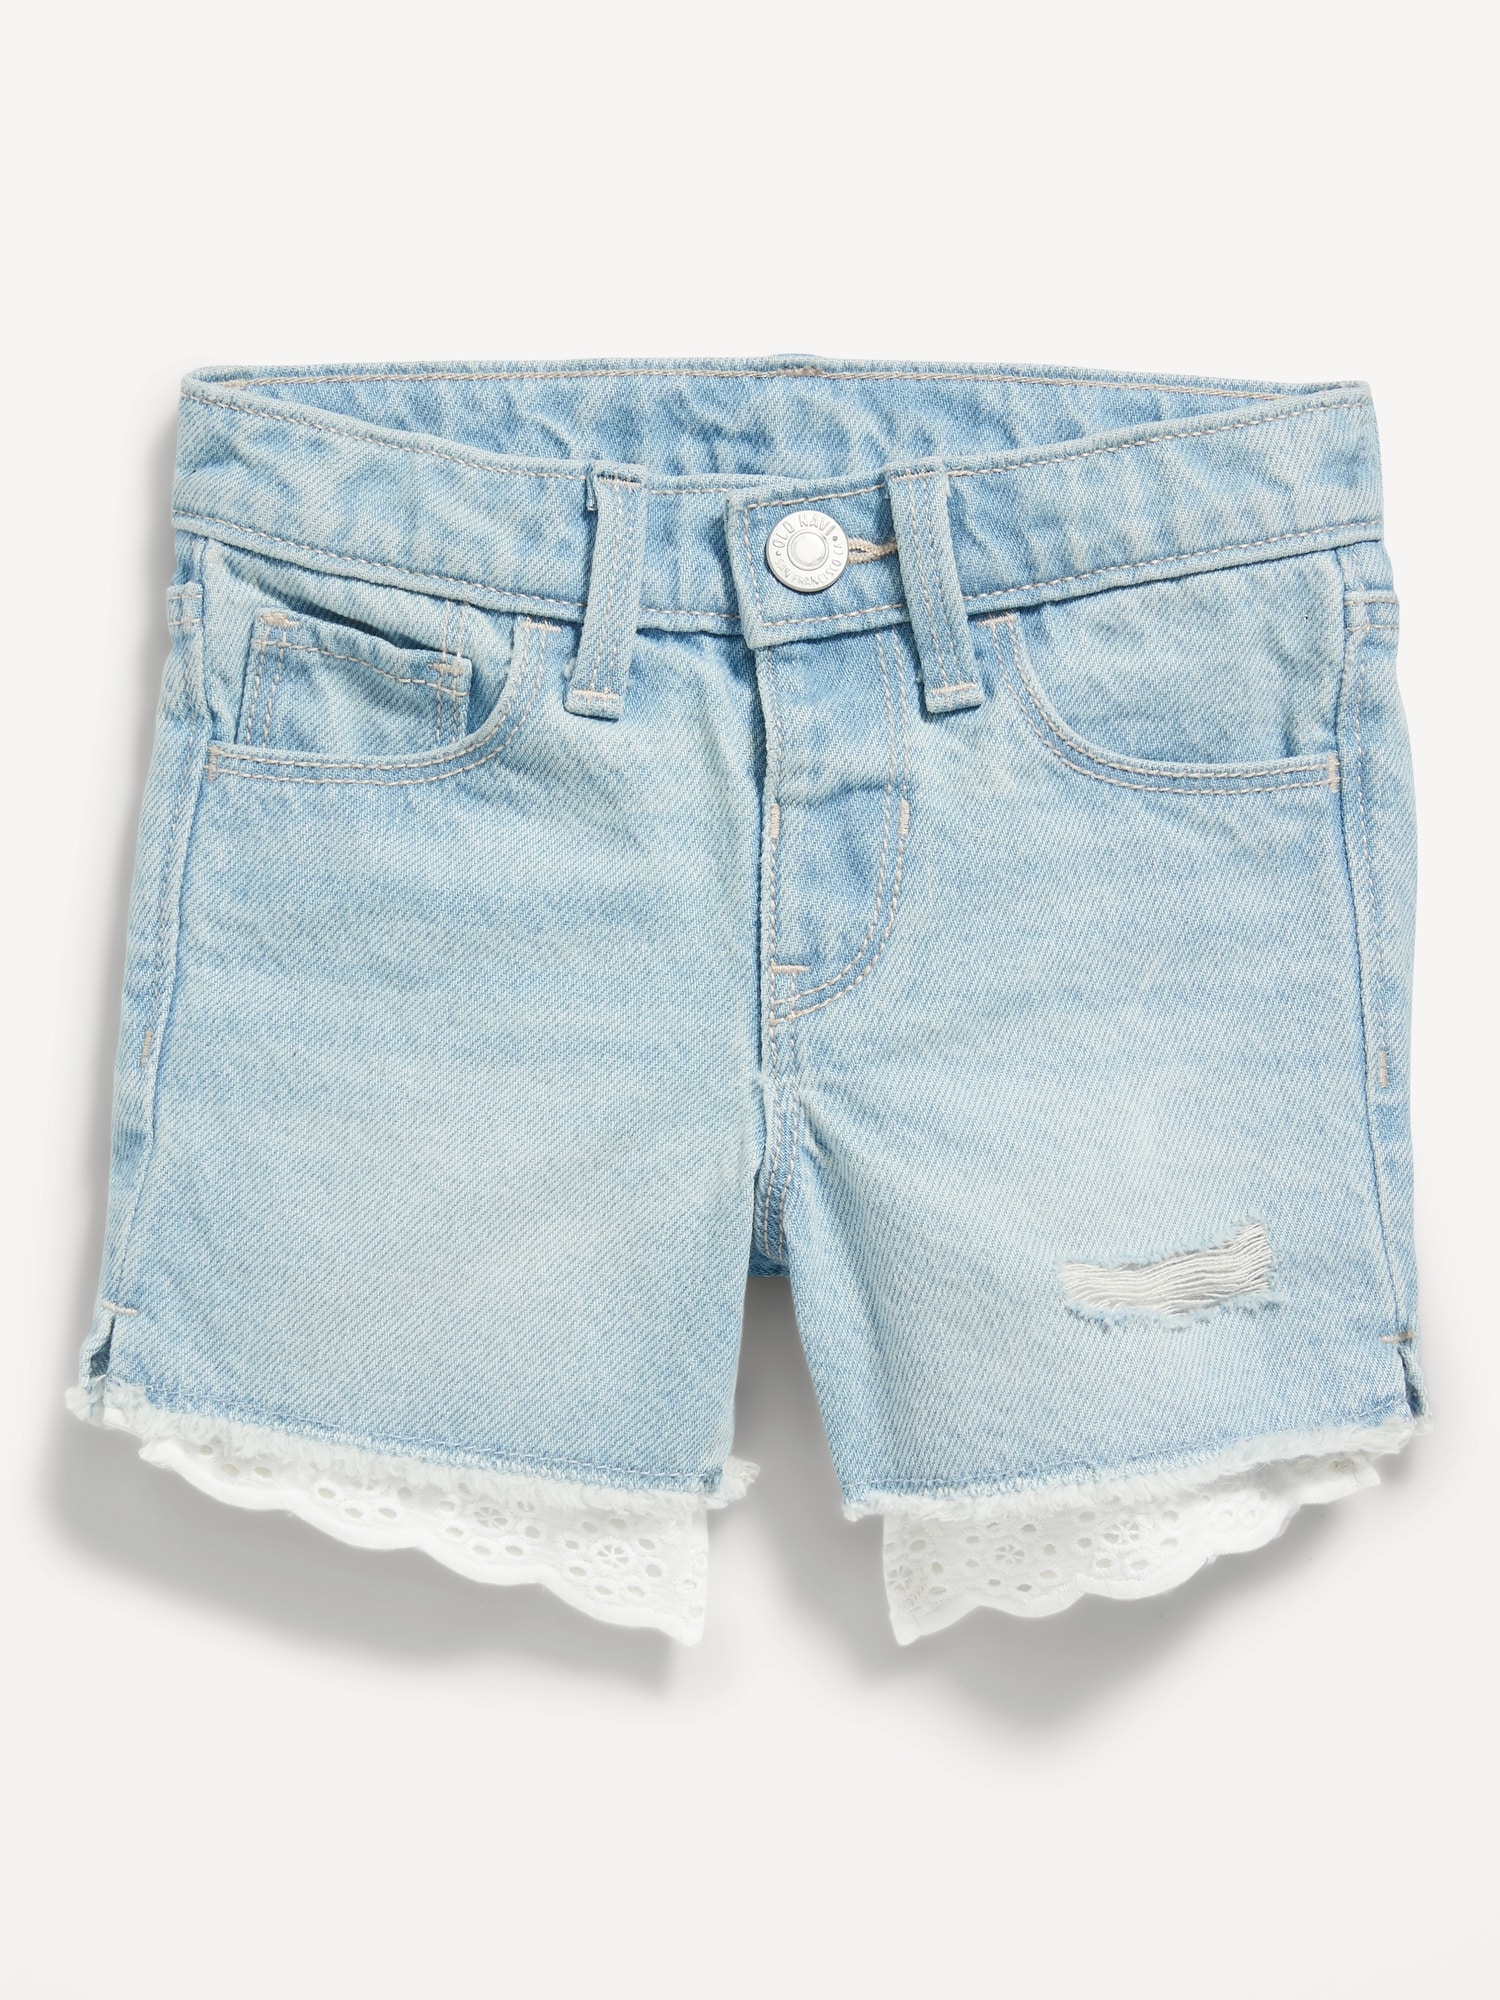 Old Navy Ripped Lace-Cutoff Jean Shorts for Toddler Girls blue. 1